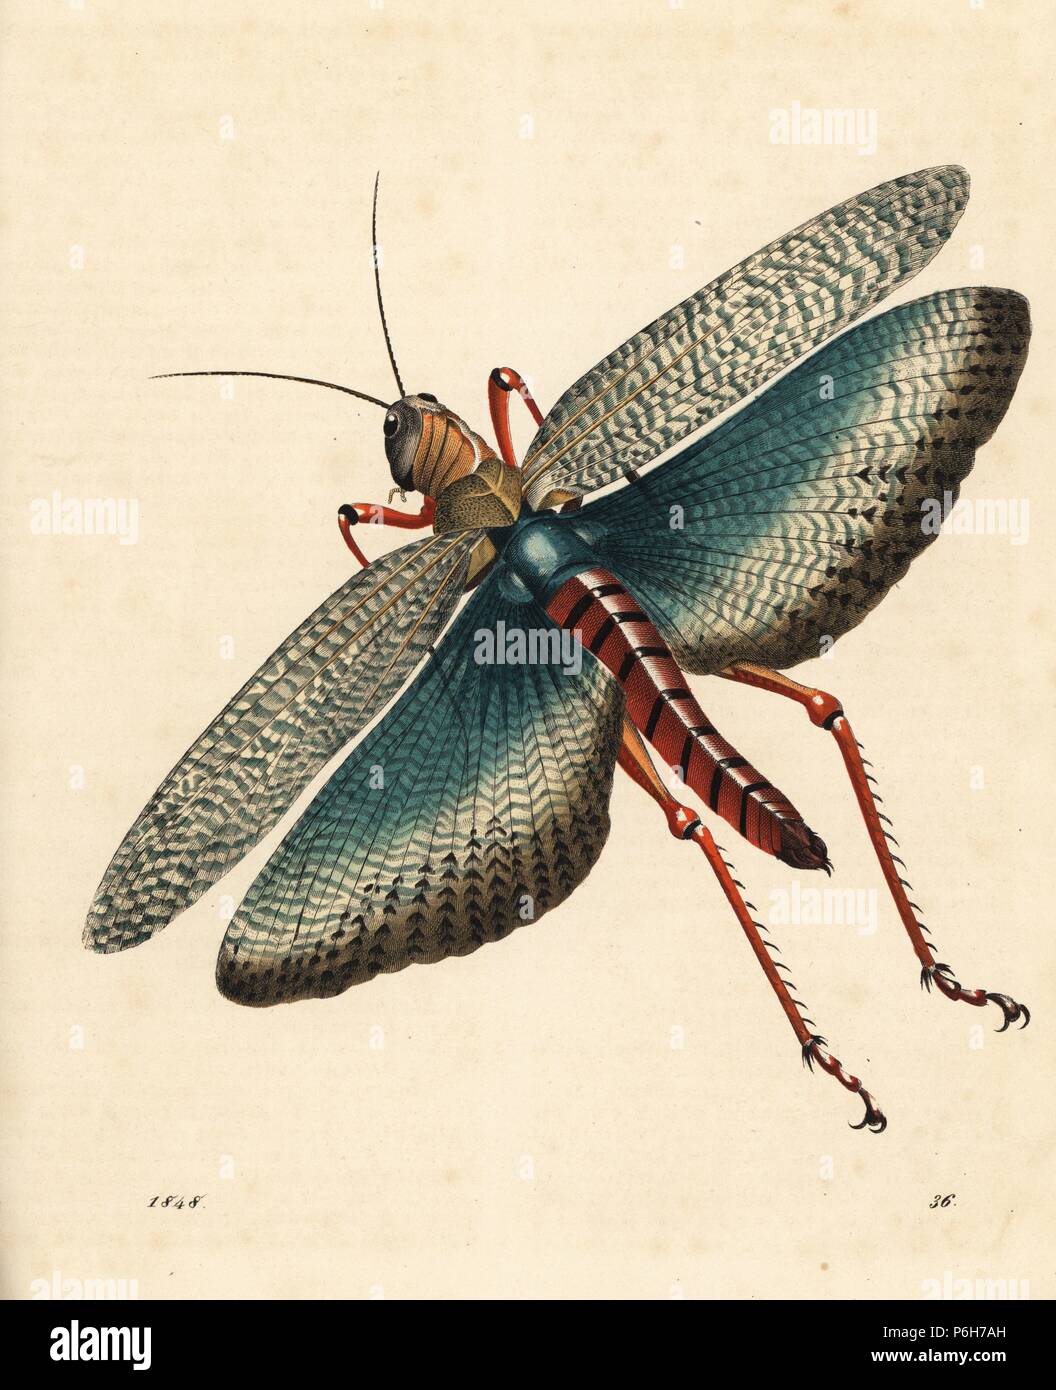 Indian locust, Gryllus indicus (Schistocerca gregaria?). Handcoloured lithograph from Carl Hoffmann's Book of the World, Stuttgart, 1848. Stock Photo